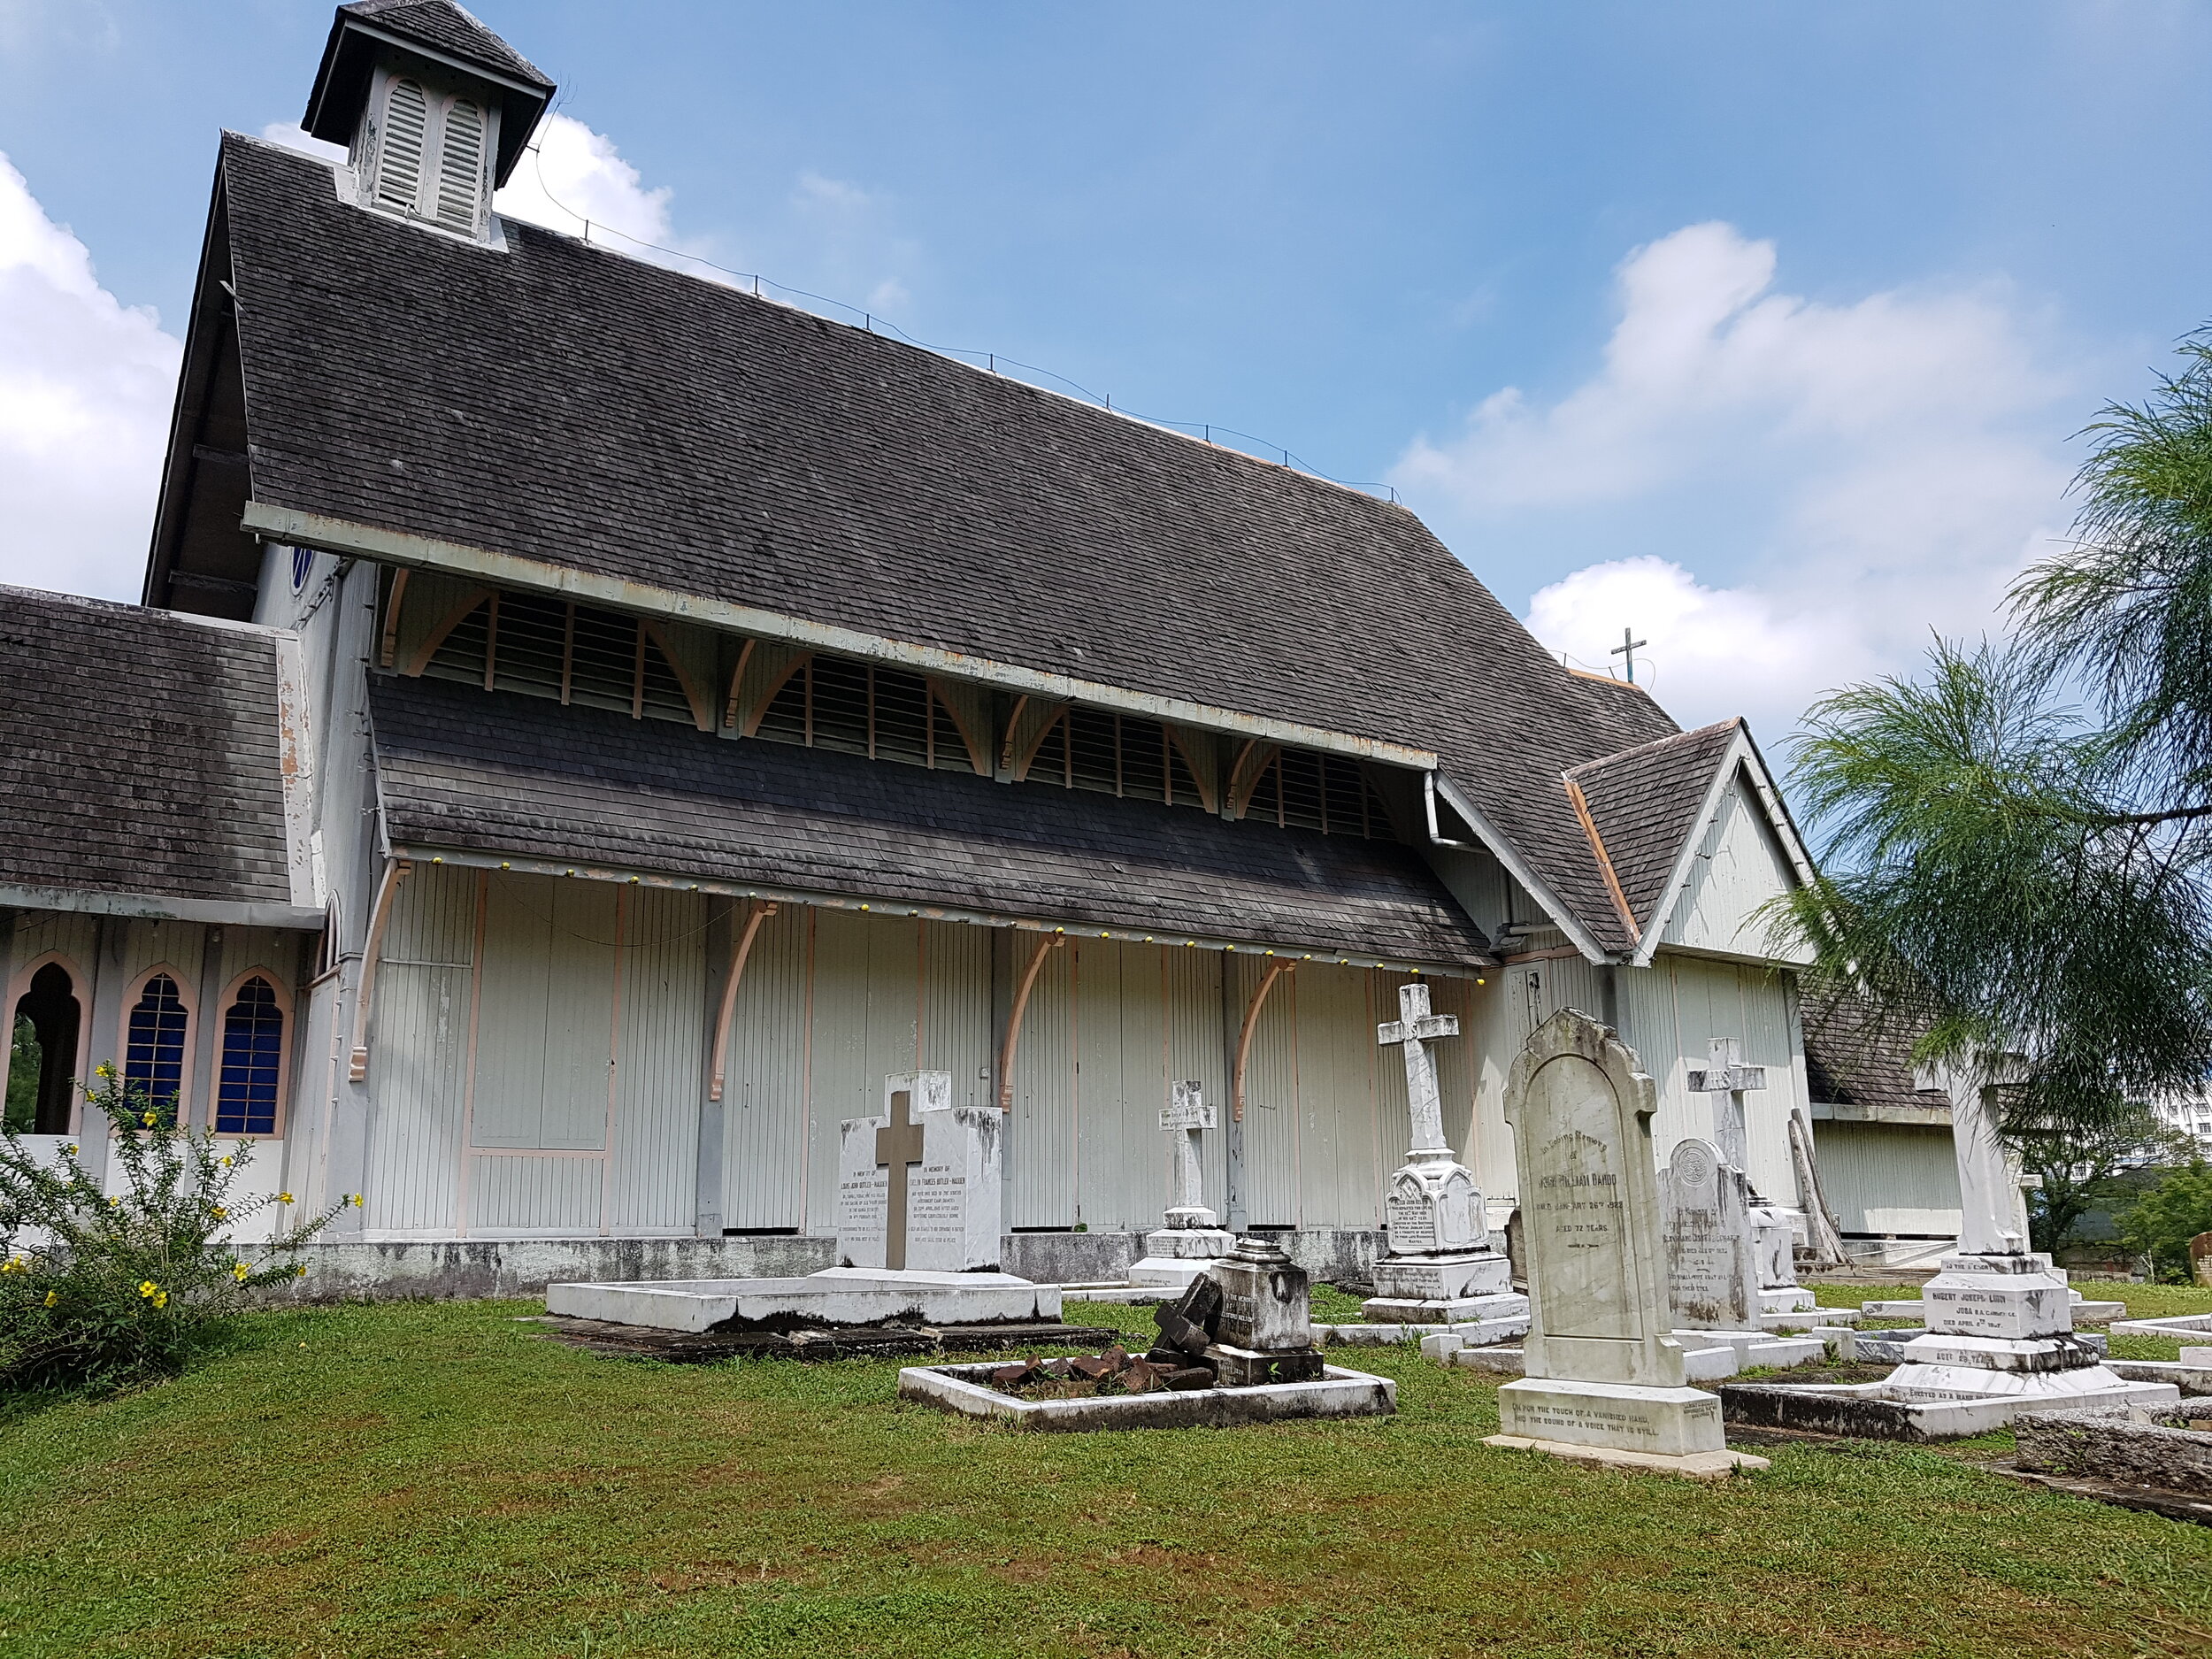 'All Saints' - Oldest church in Malaysia (Taipeng) built entirely from wood.